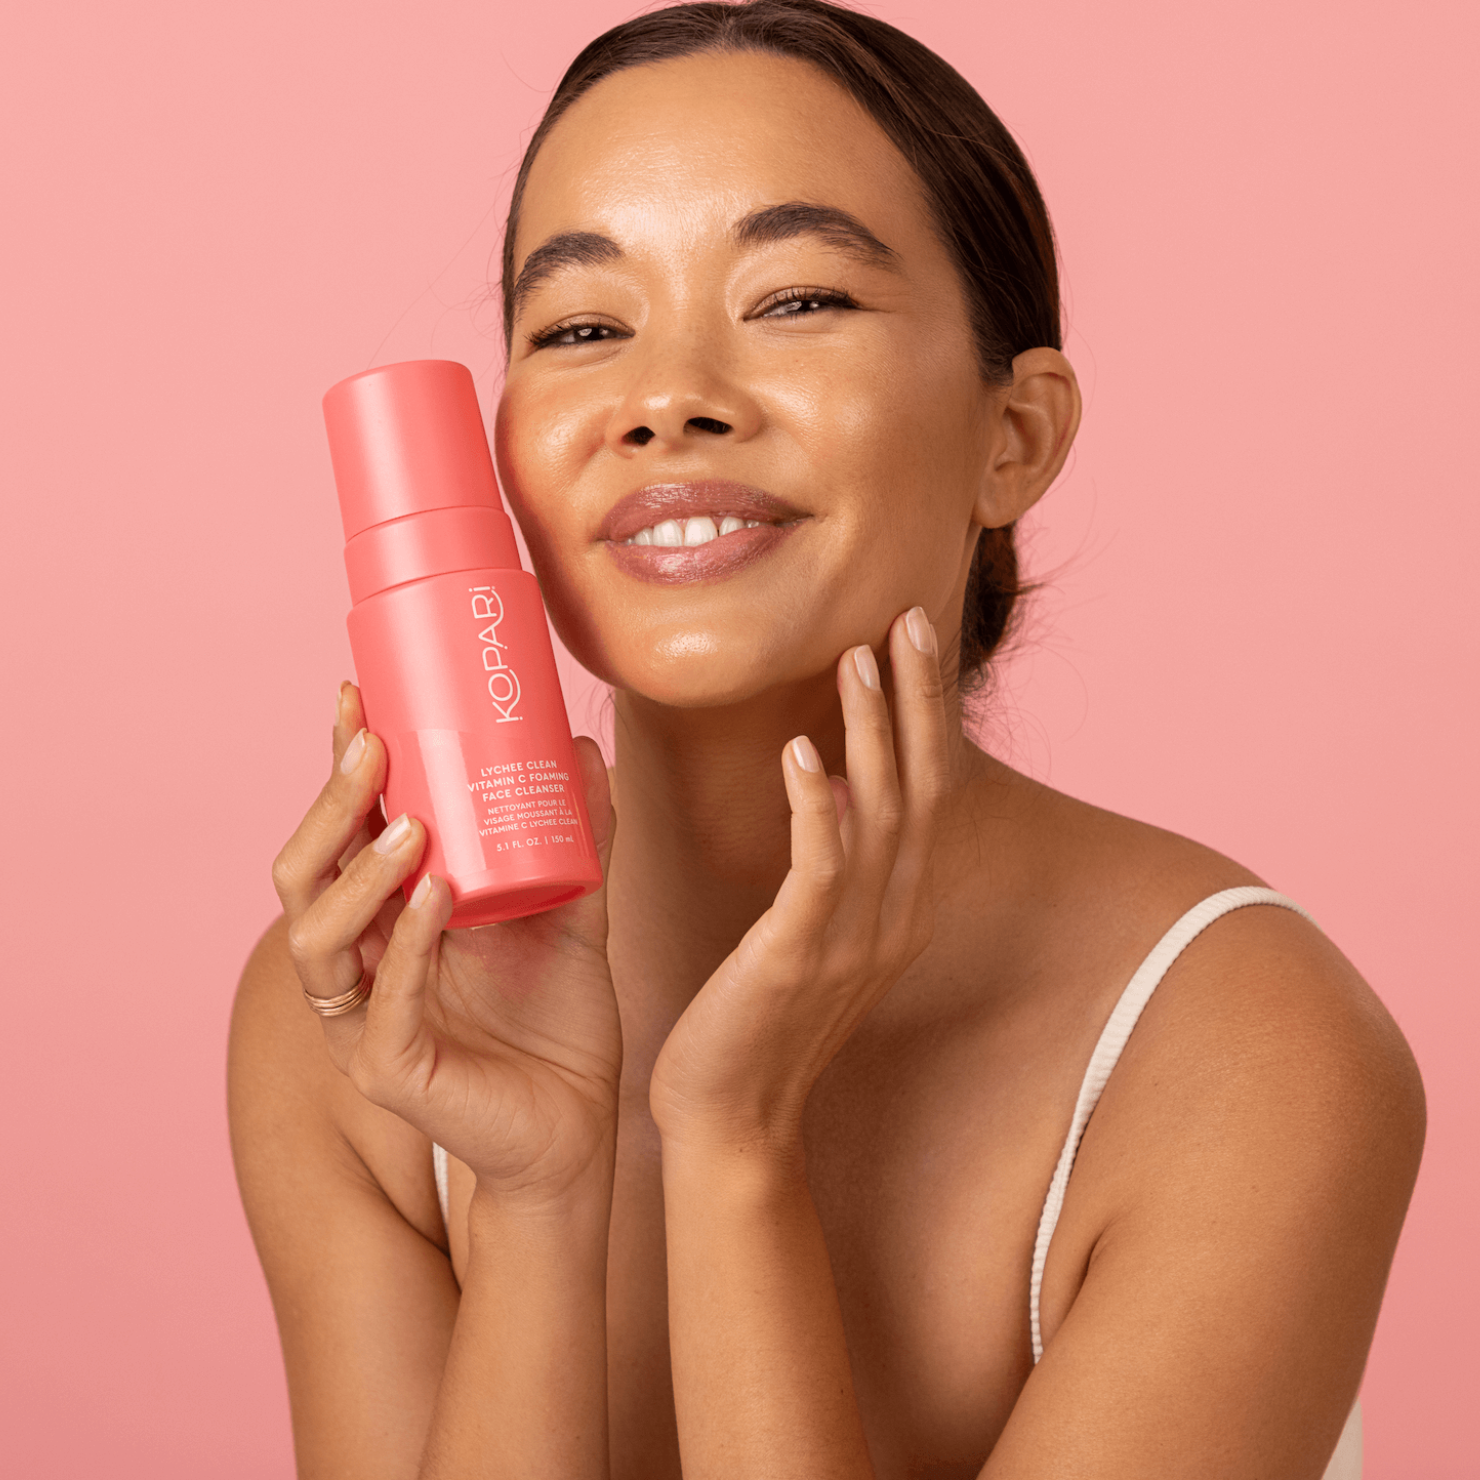 https://cdn.shopify.com/s/files/1/0777/7633/files/face_cleanser_lychee.png?v=1689351408